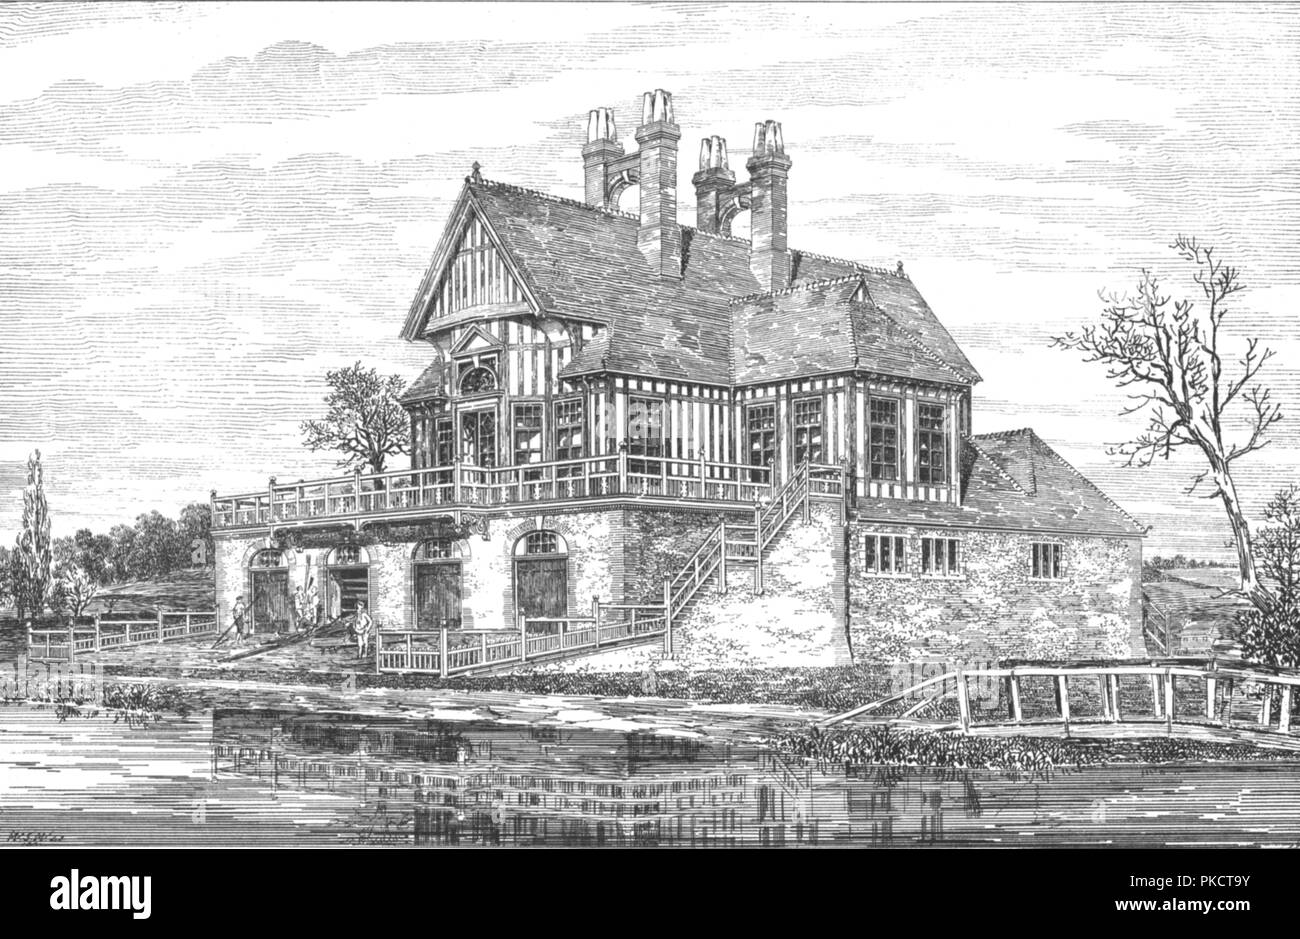 New Boat House, Oxford, 1880. Artist: WSW. Stock Photo